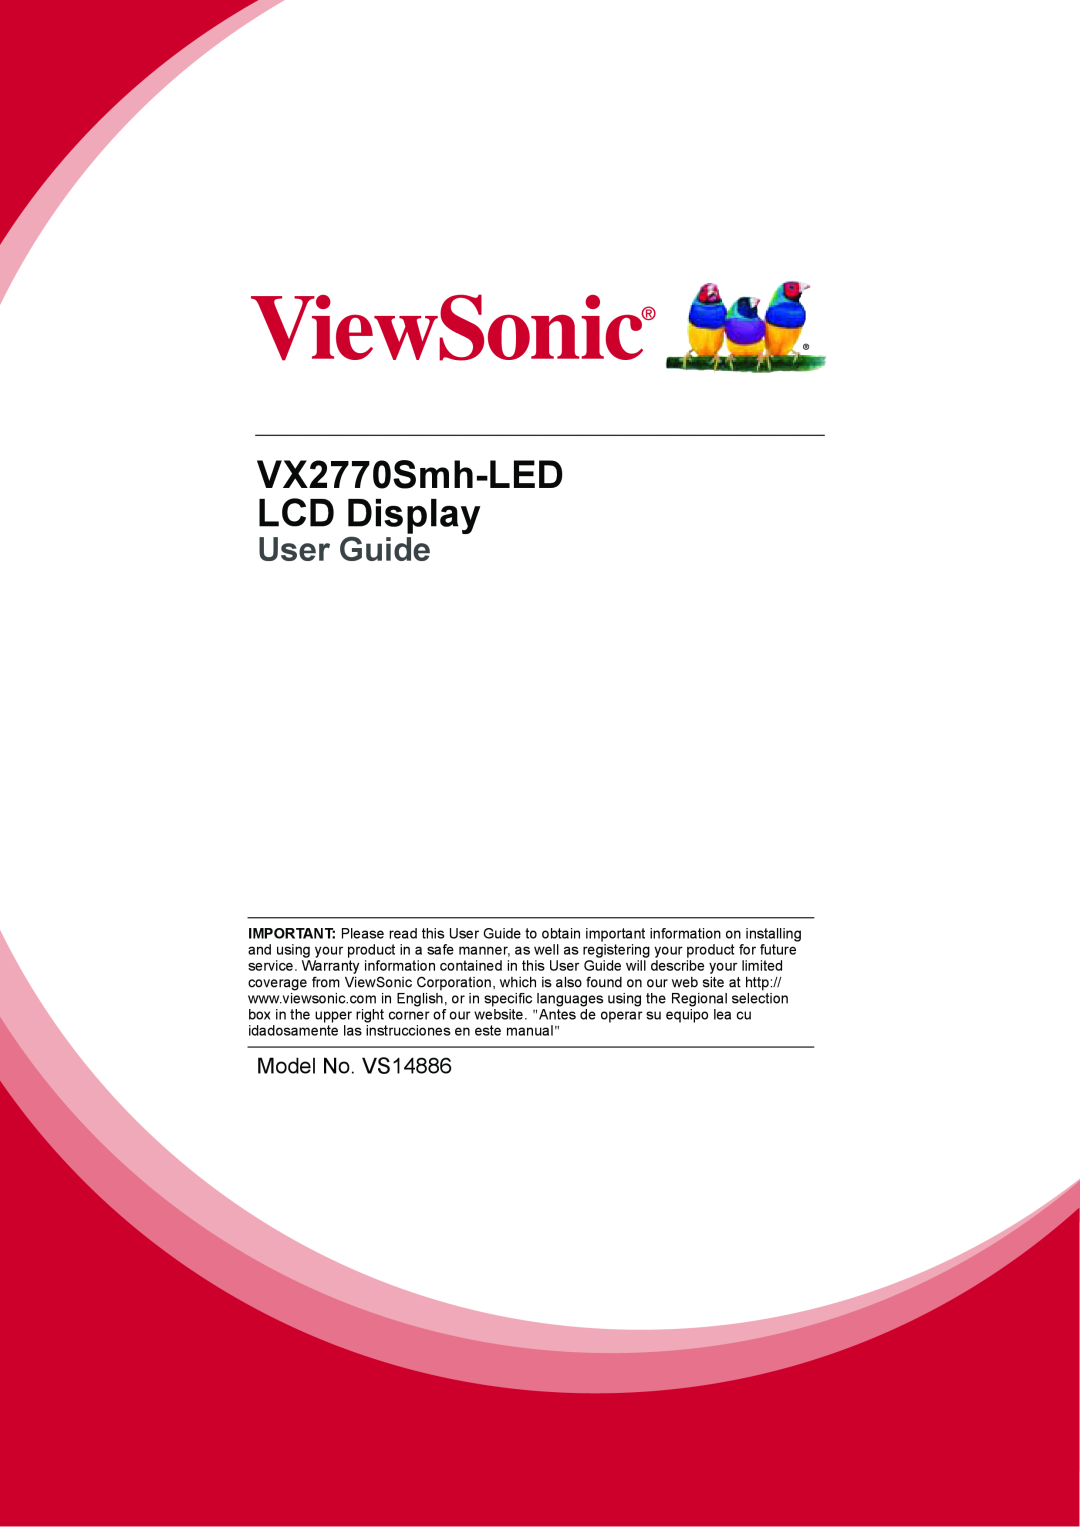 ViewSonic VX2770SMHLED warranty VX2770Smh-LED LCD Display, User Guide 